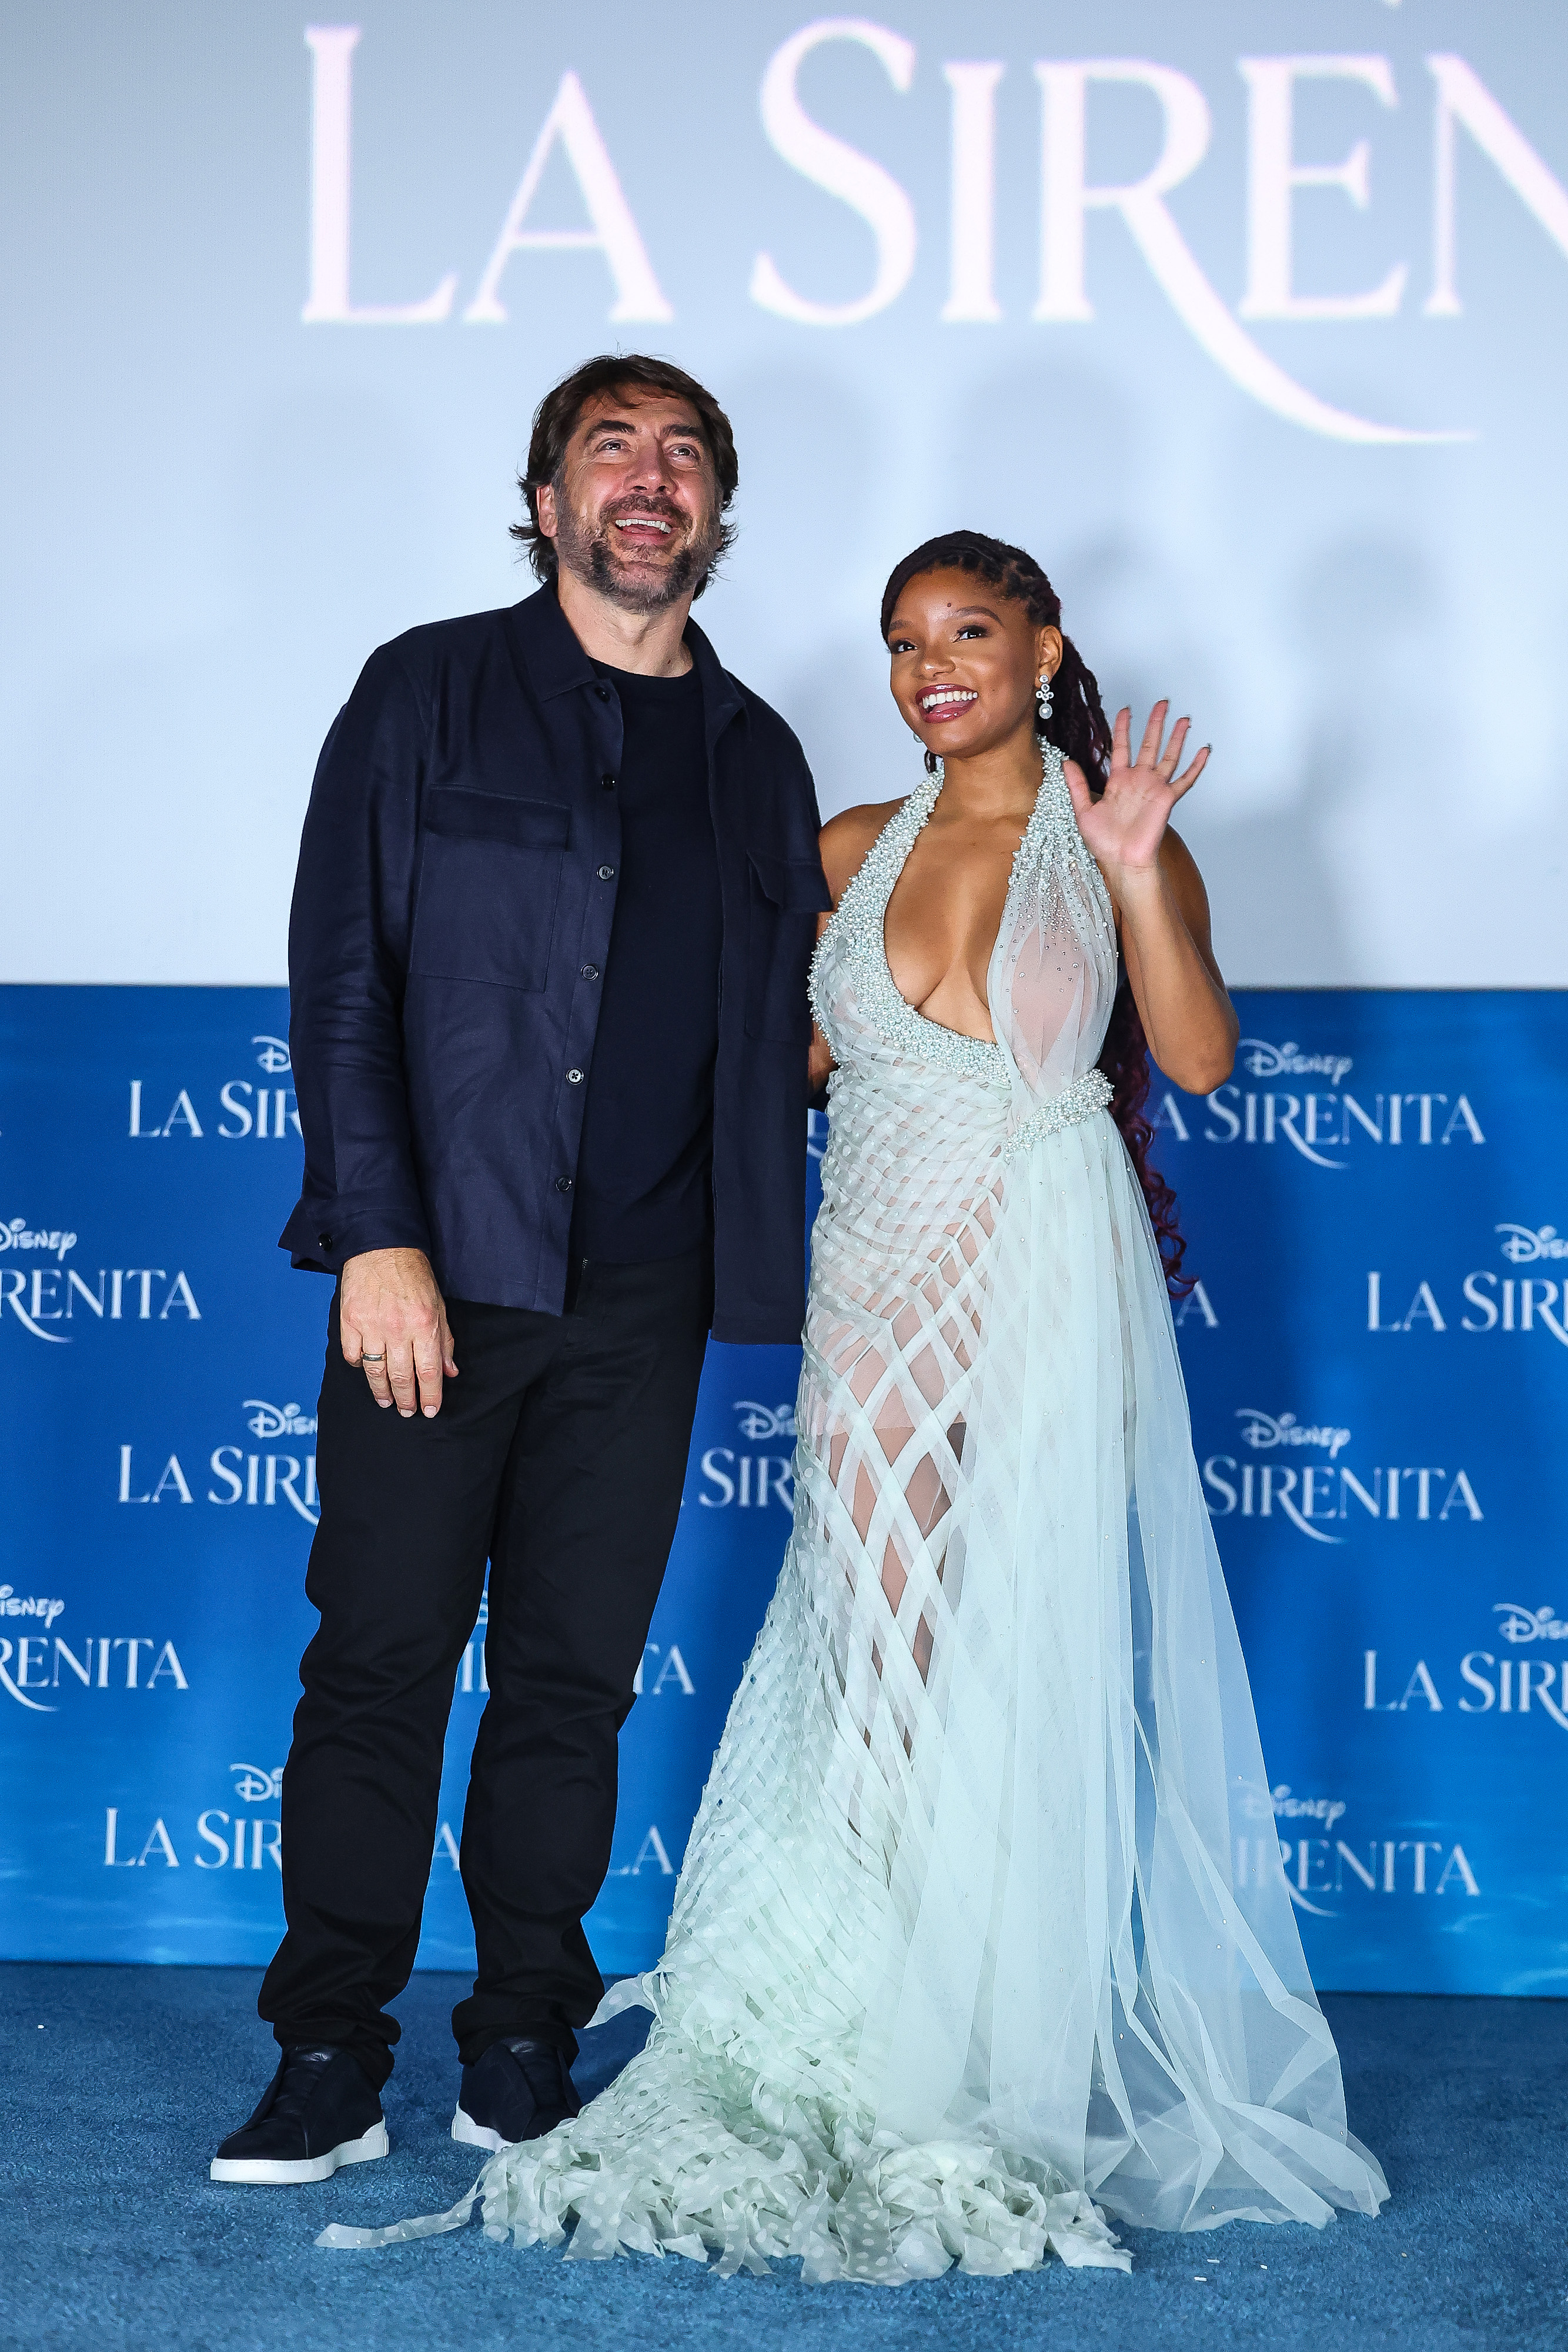 Javier Bardem and Halle Bailey